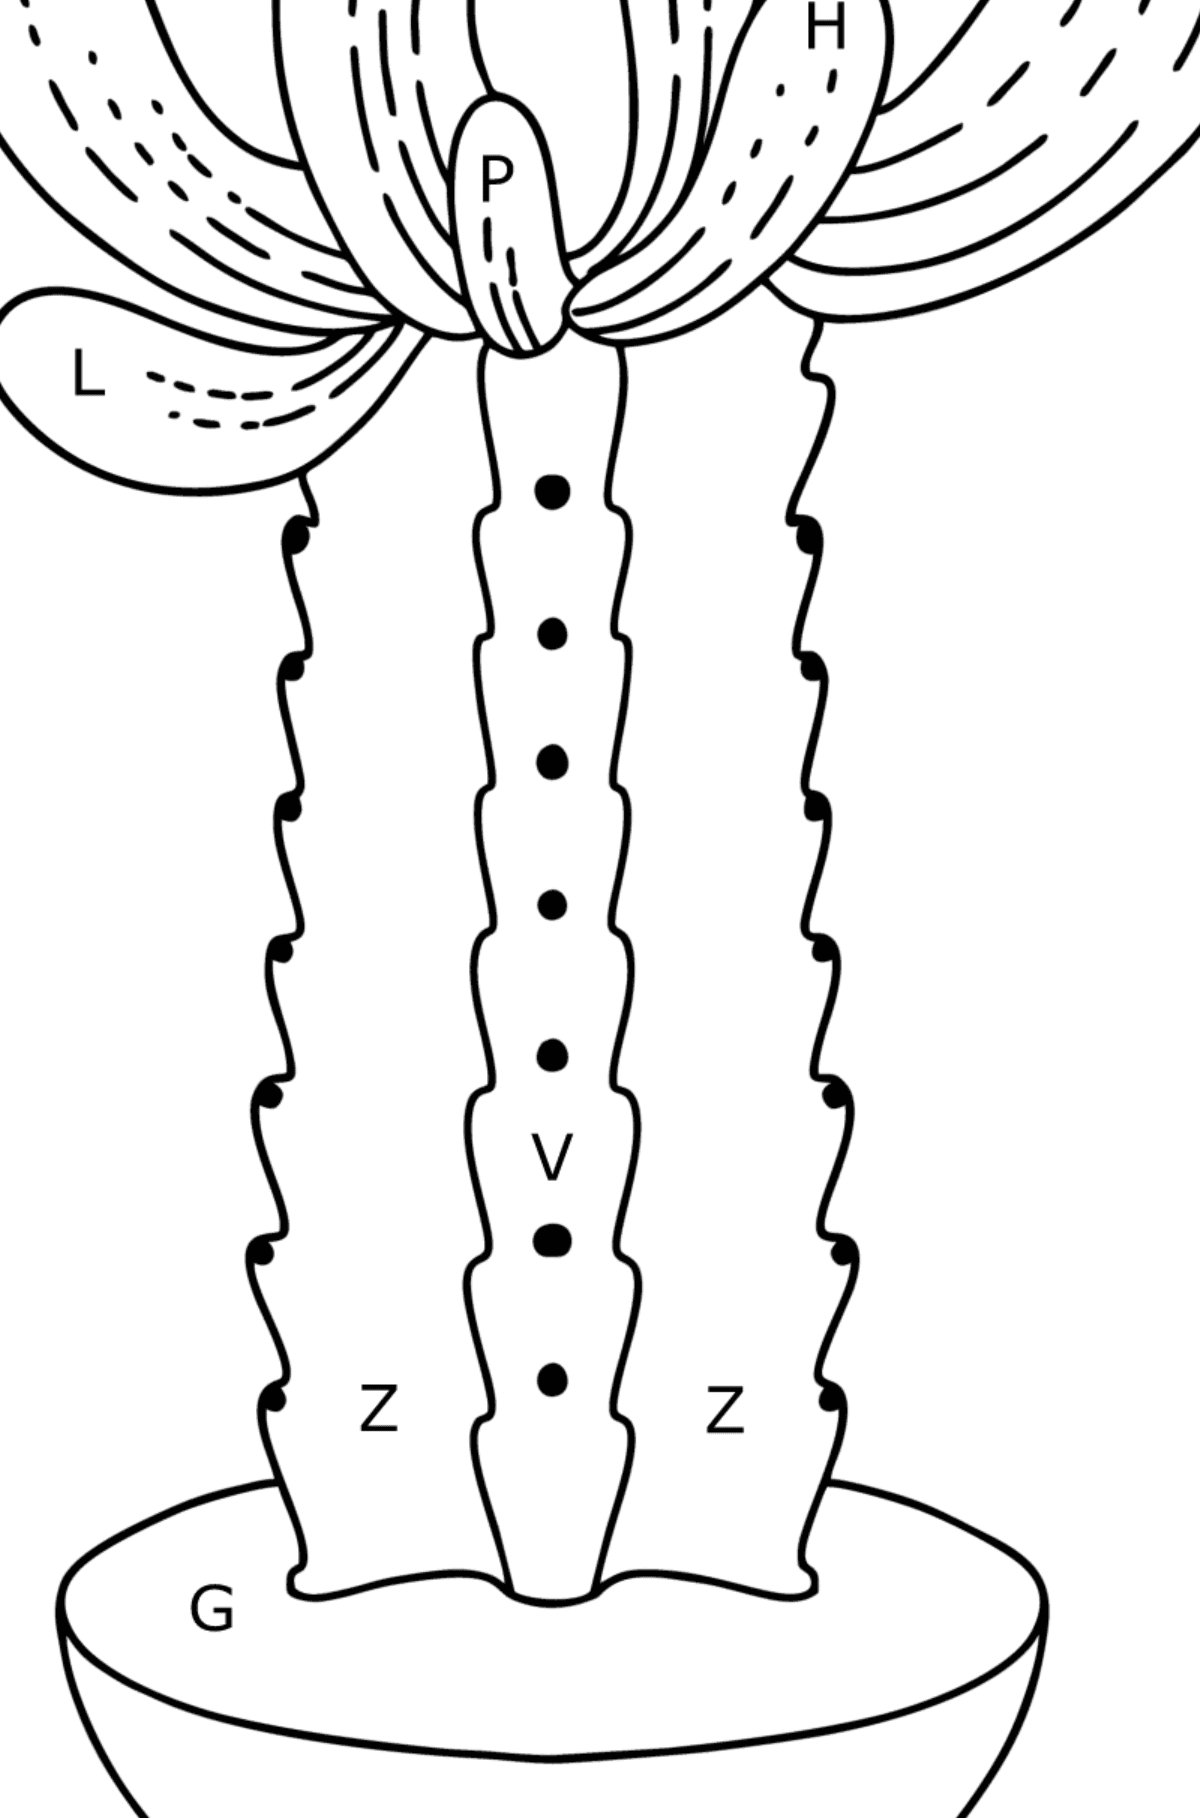 Simple cactus coloring page - Coloring by Letters for Kids